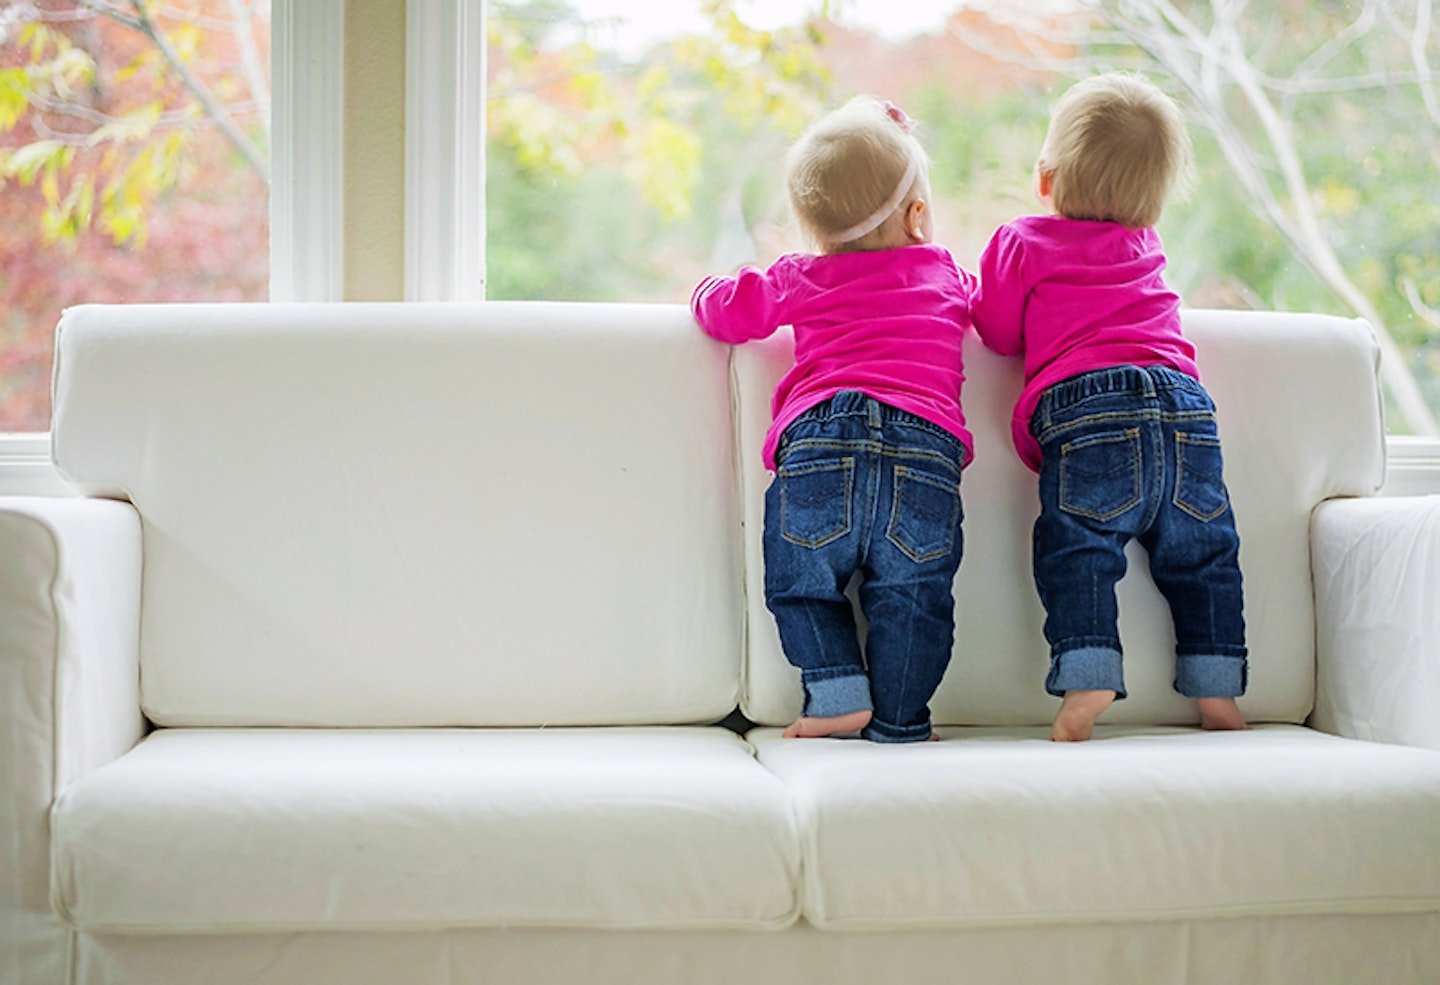 Identical twins? Here‘s how to raise them as individuals